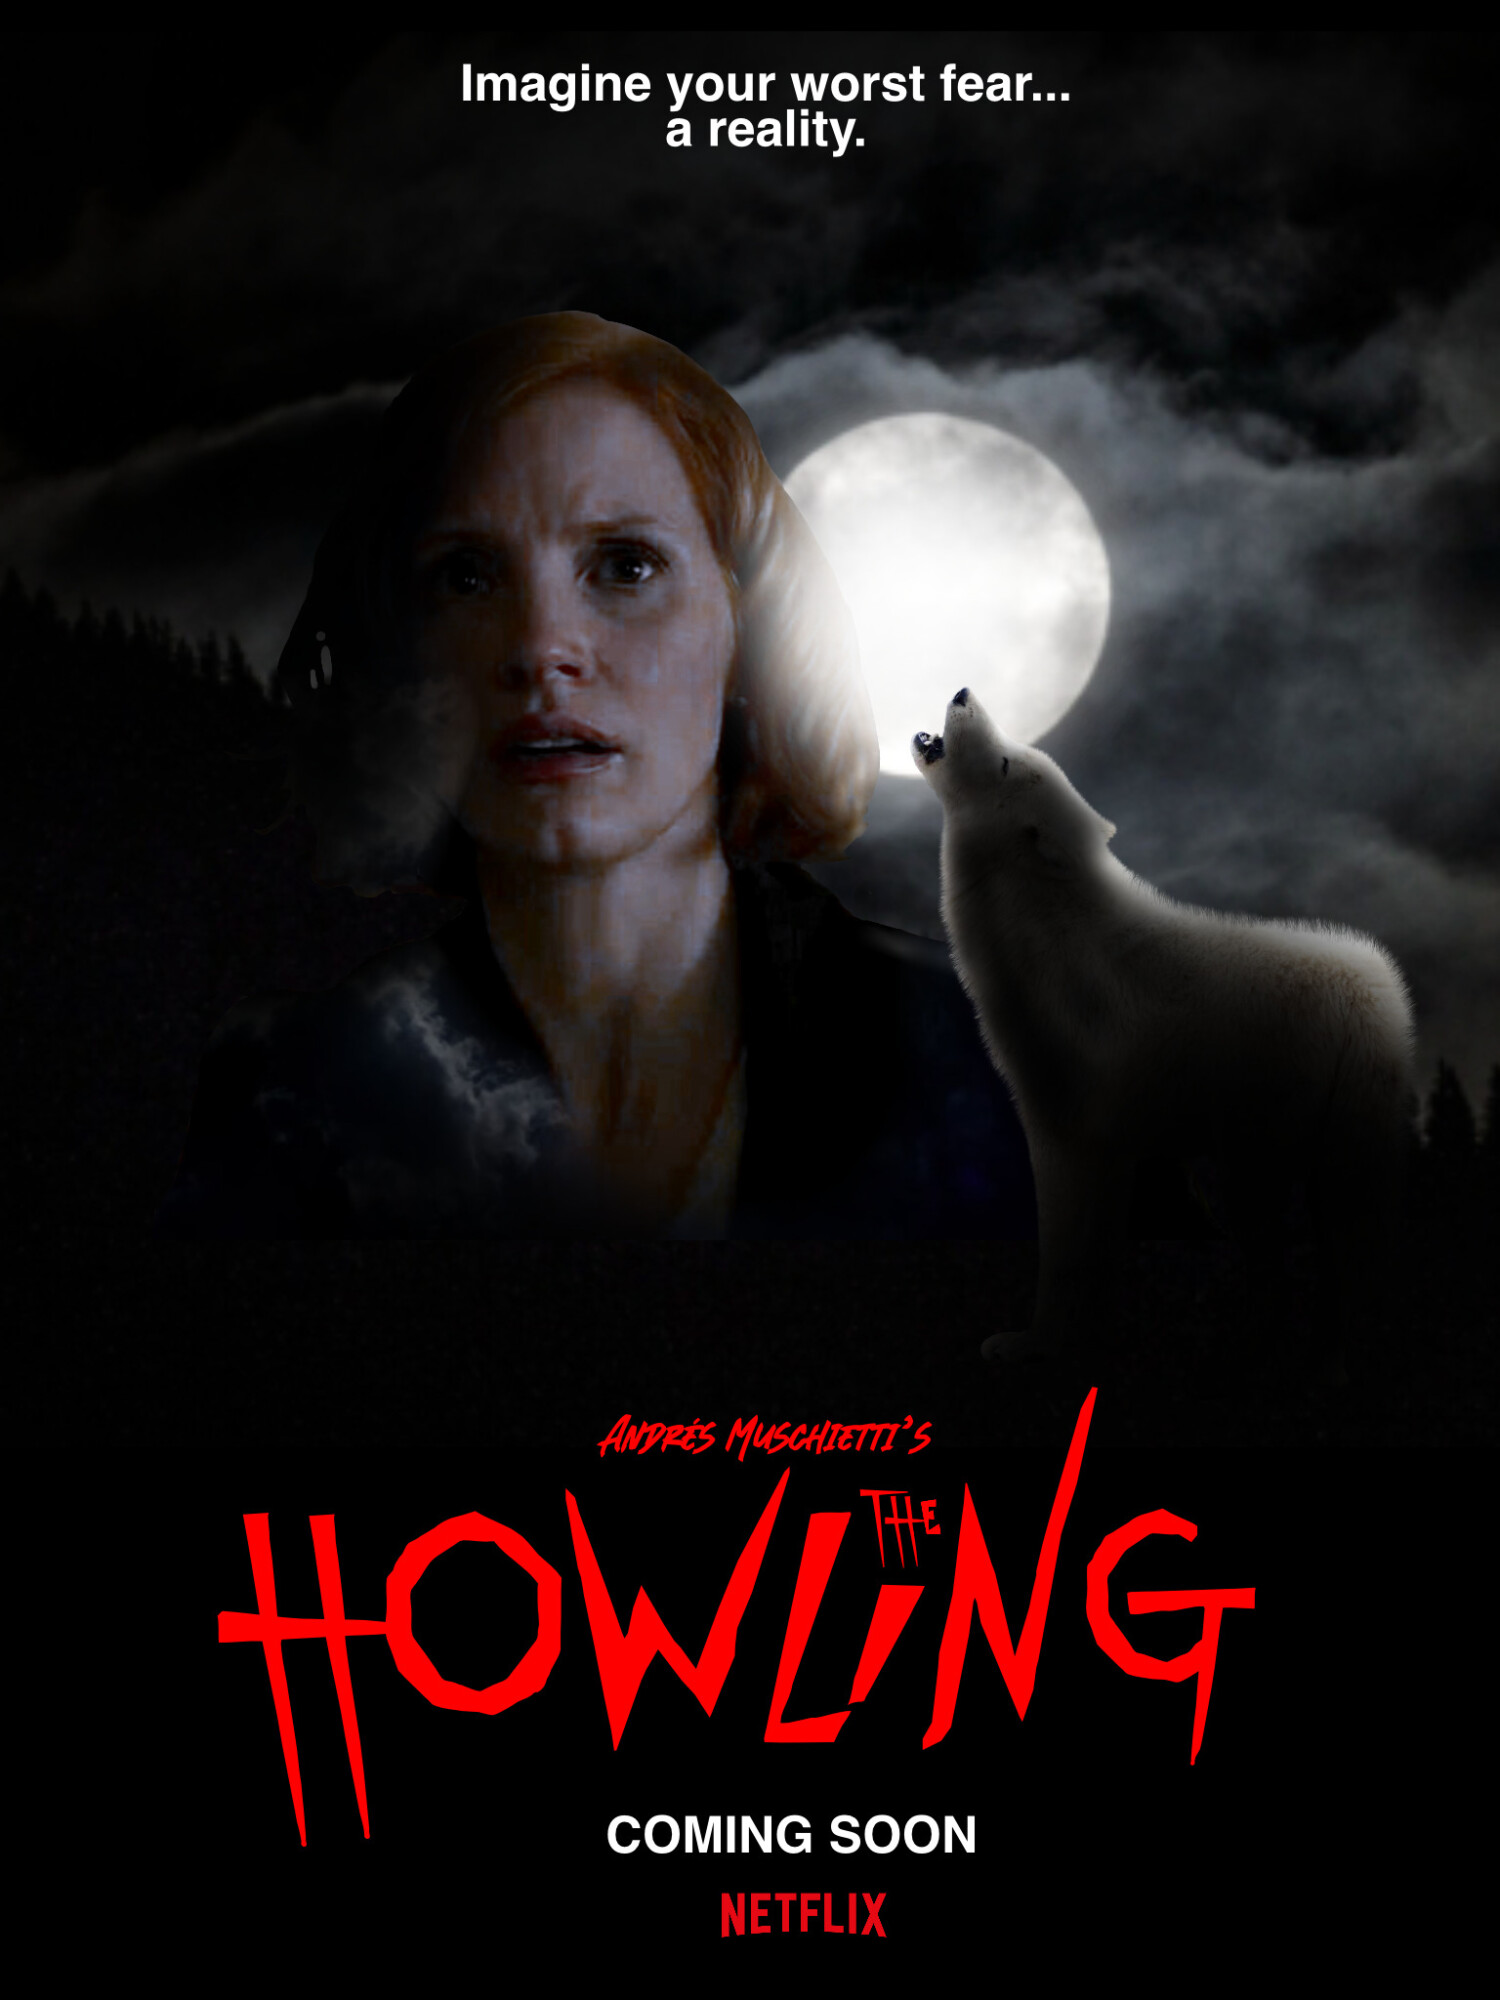 Andy Muschietti’s The Howling (TBA) – Concept Poster